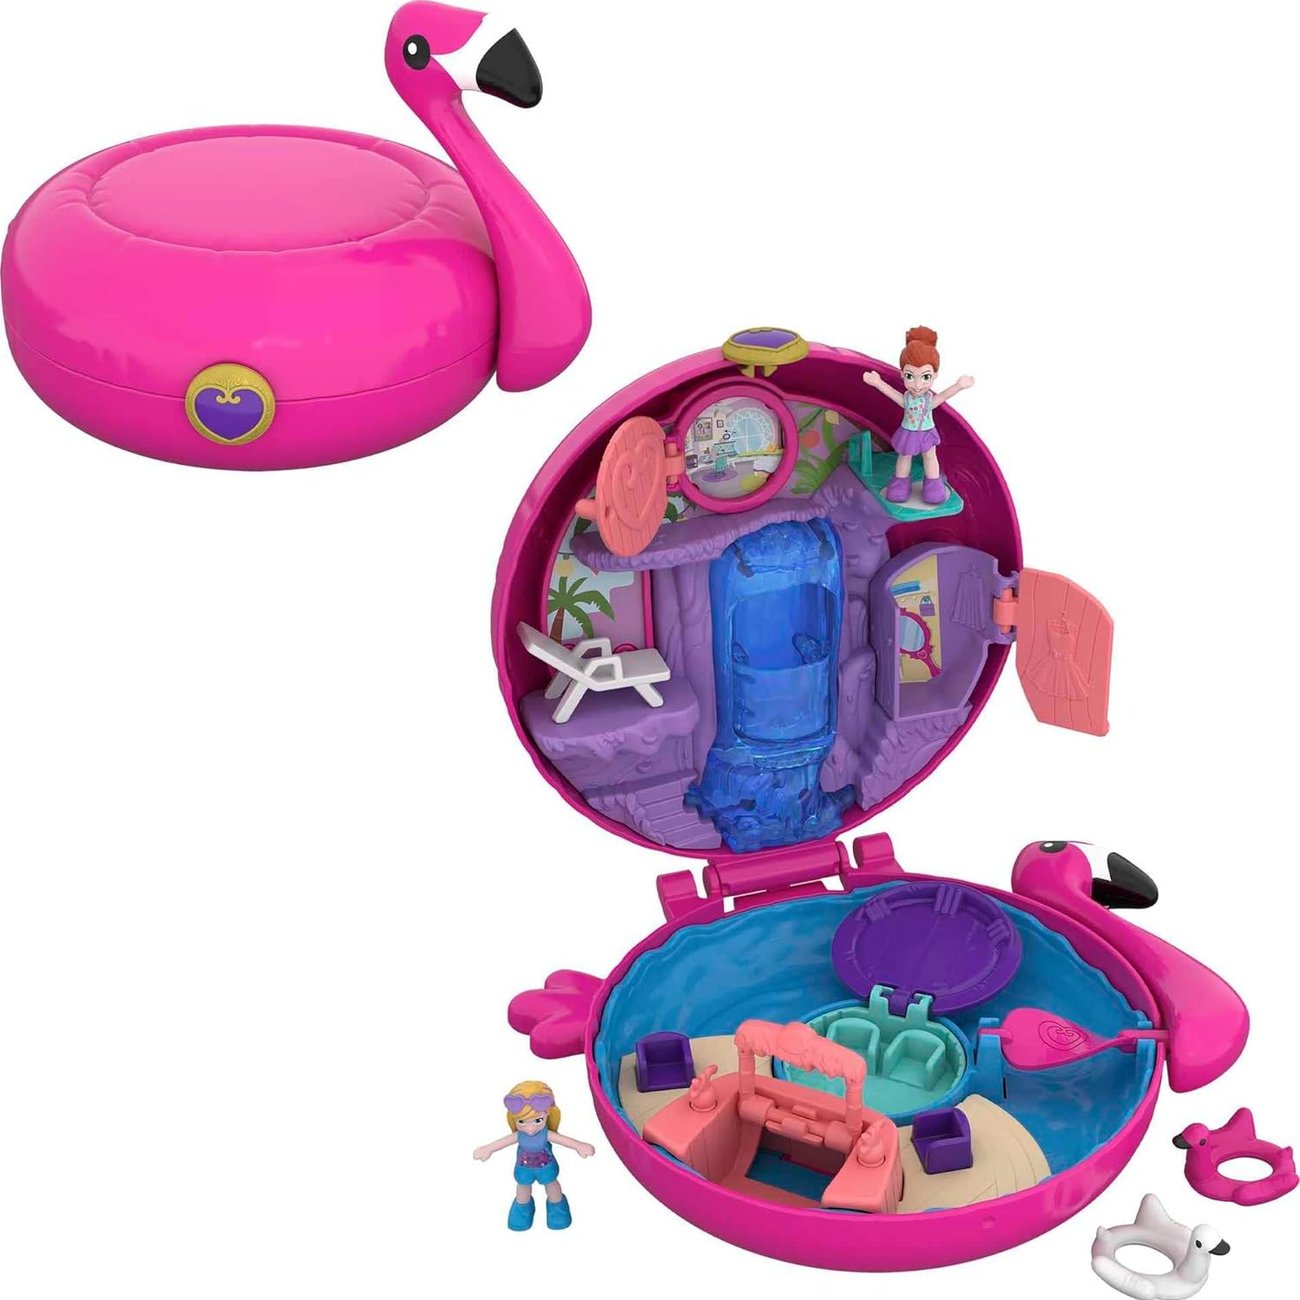 Polly Pocket FRY38 - World Flamingo-Schwimmring